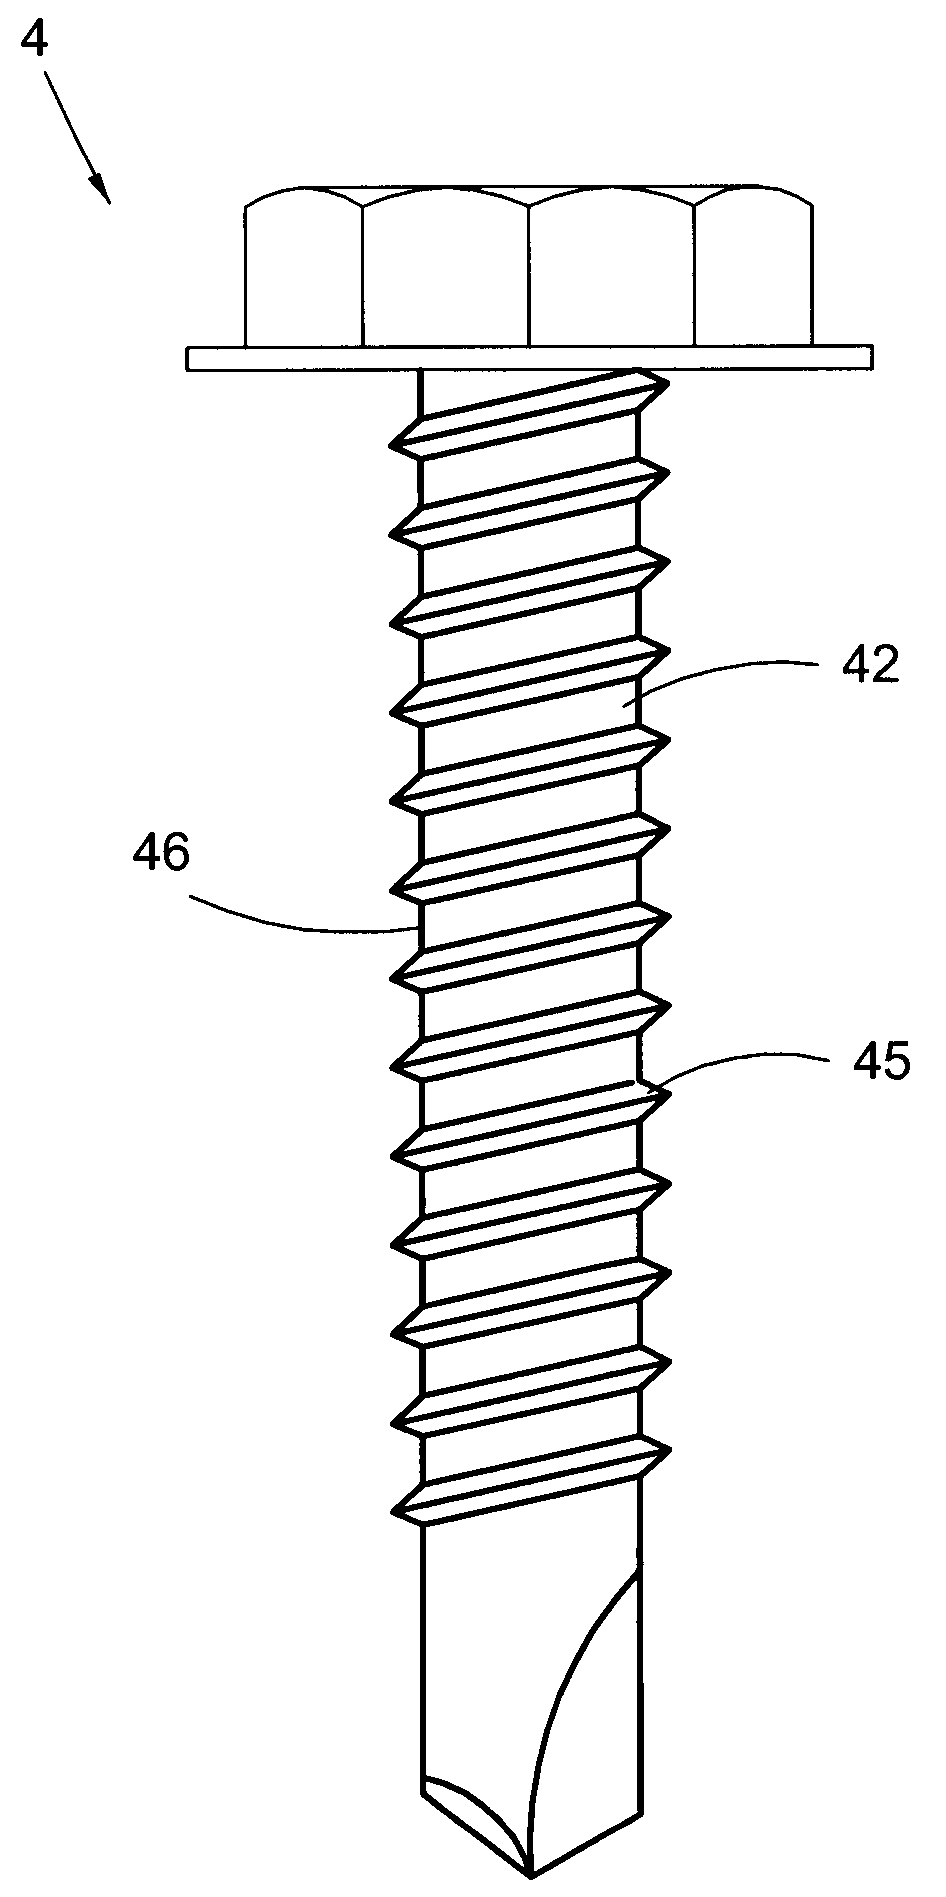 Method for cold forging high strength fastener with austenitic 300 series material